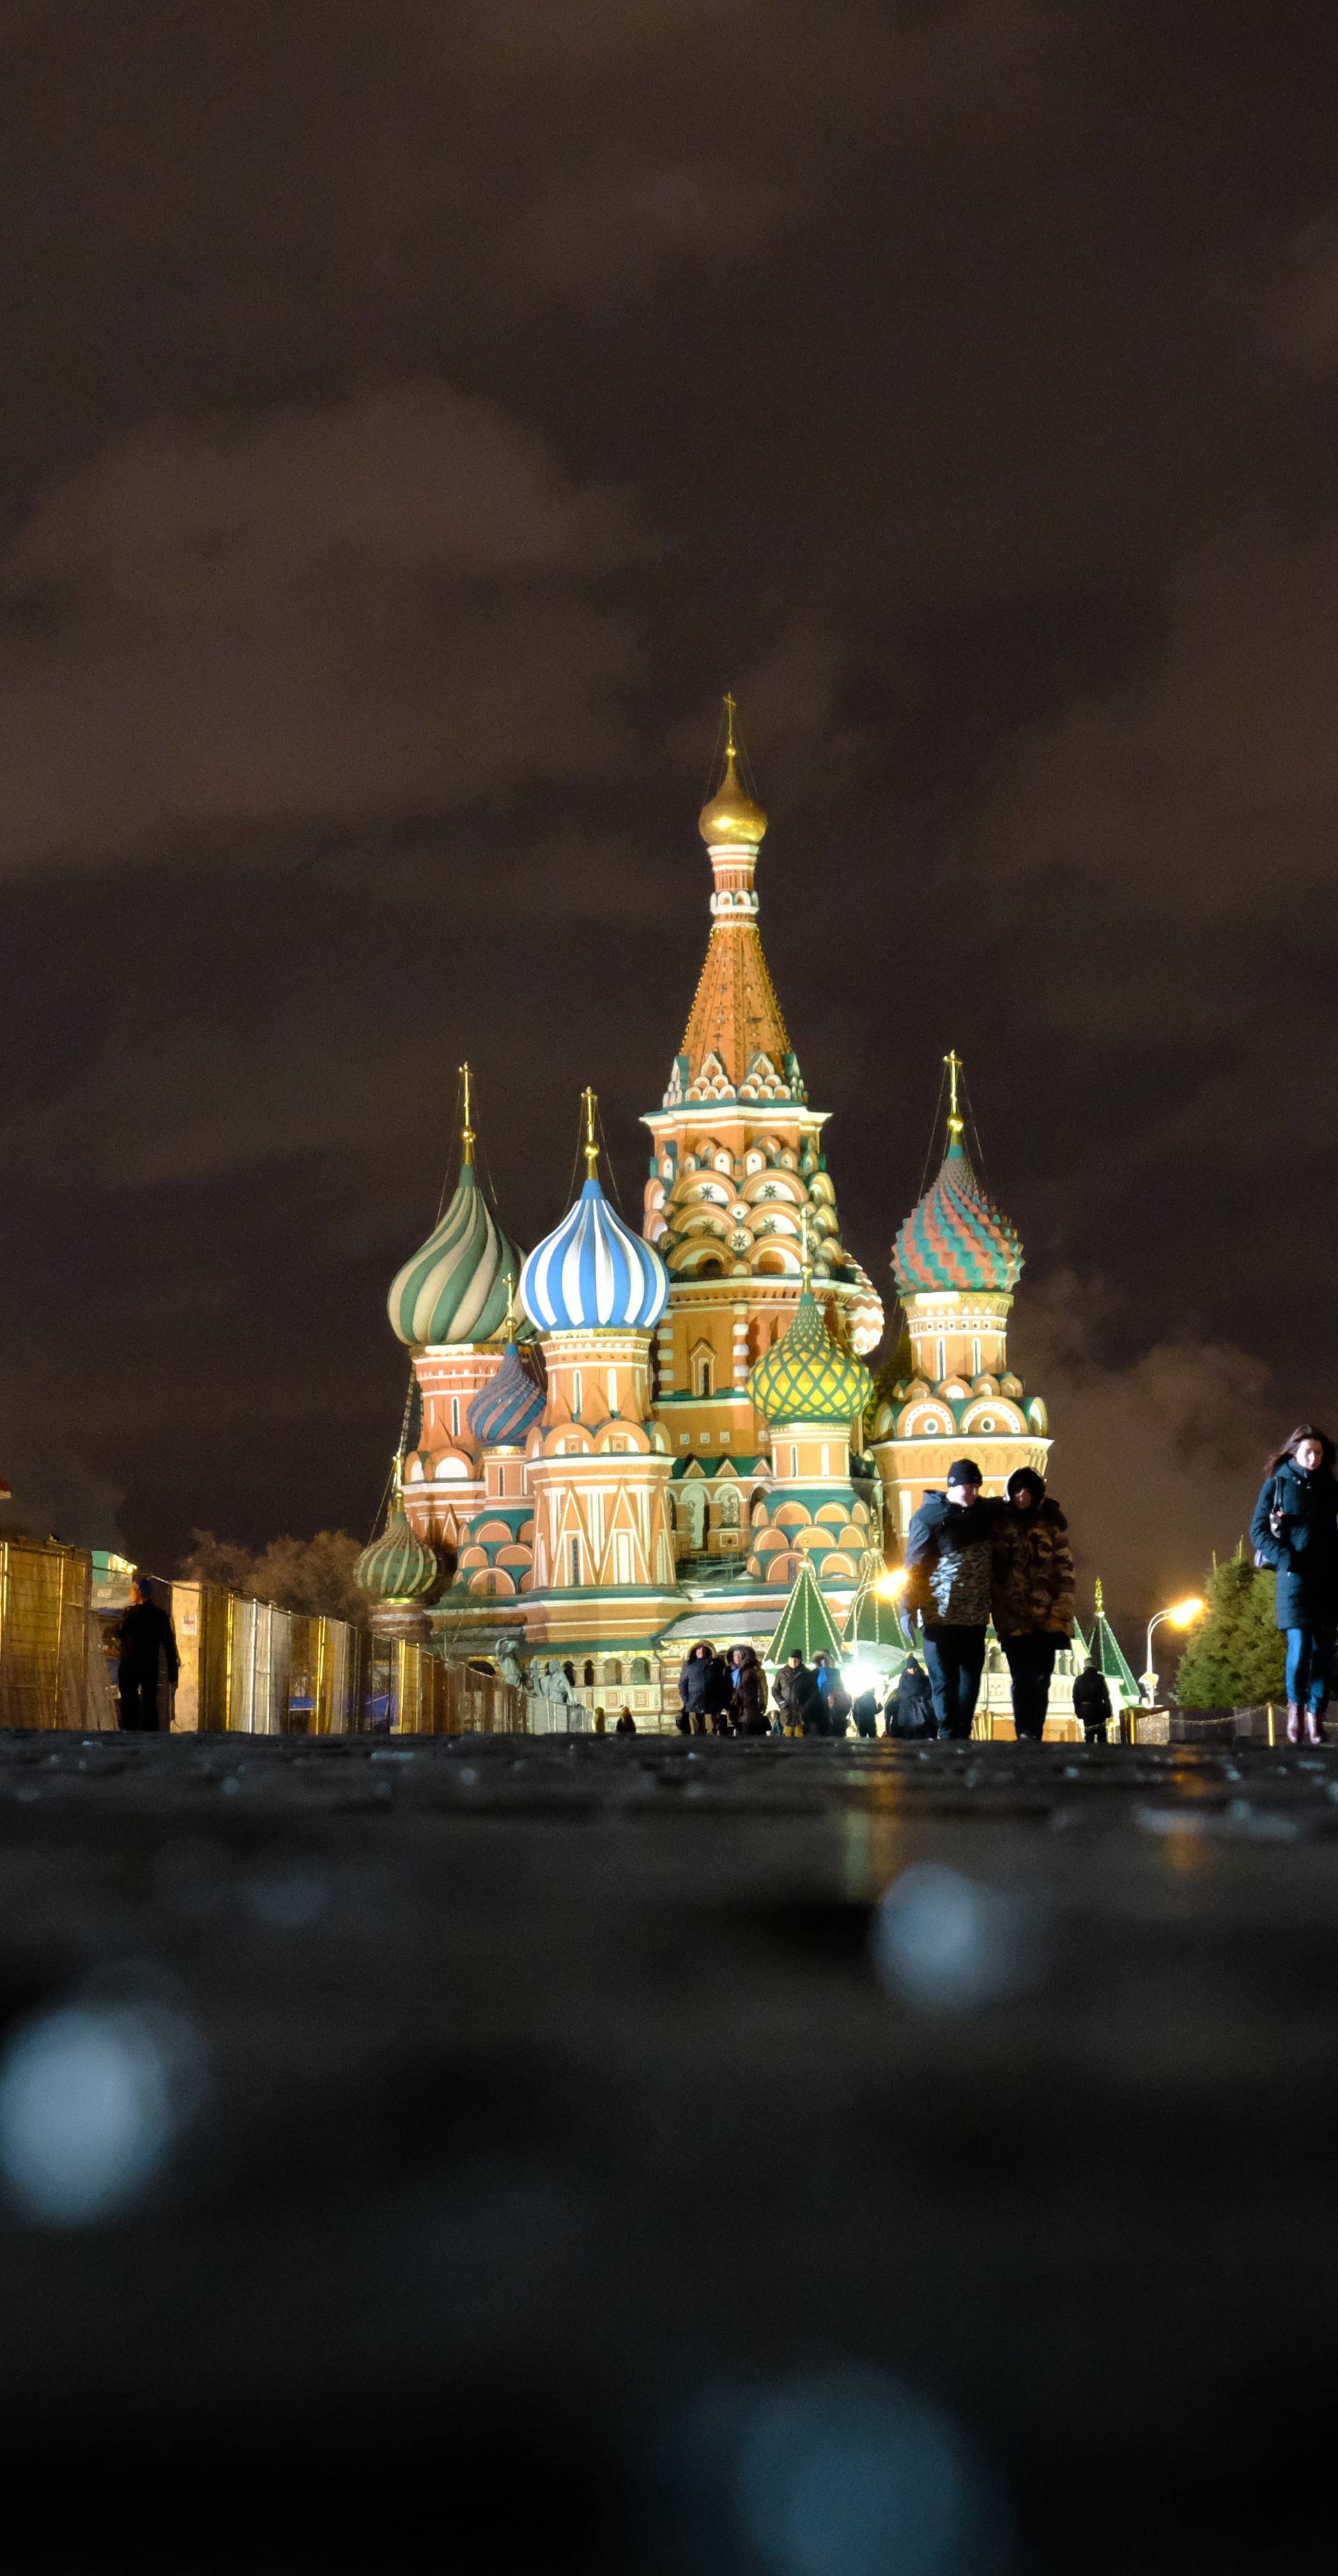 Moscow - Saint Basil's Cathedral